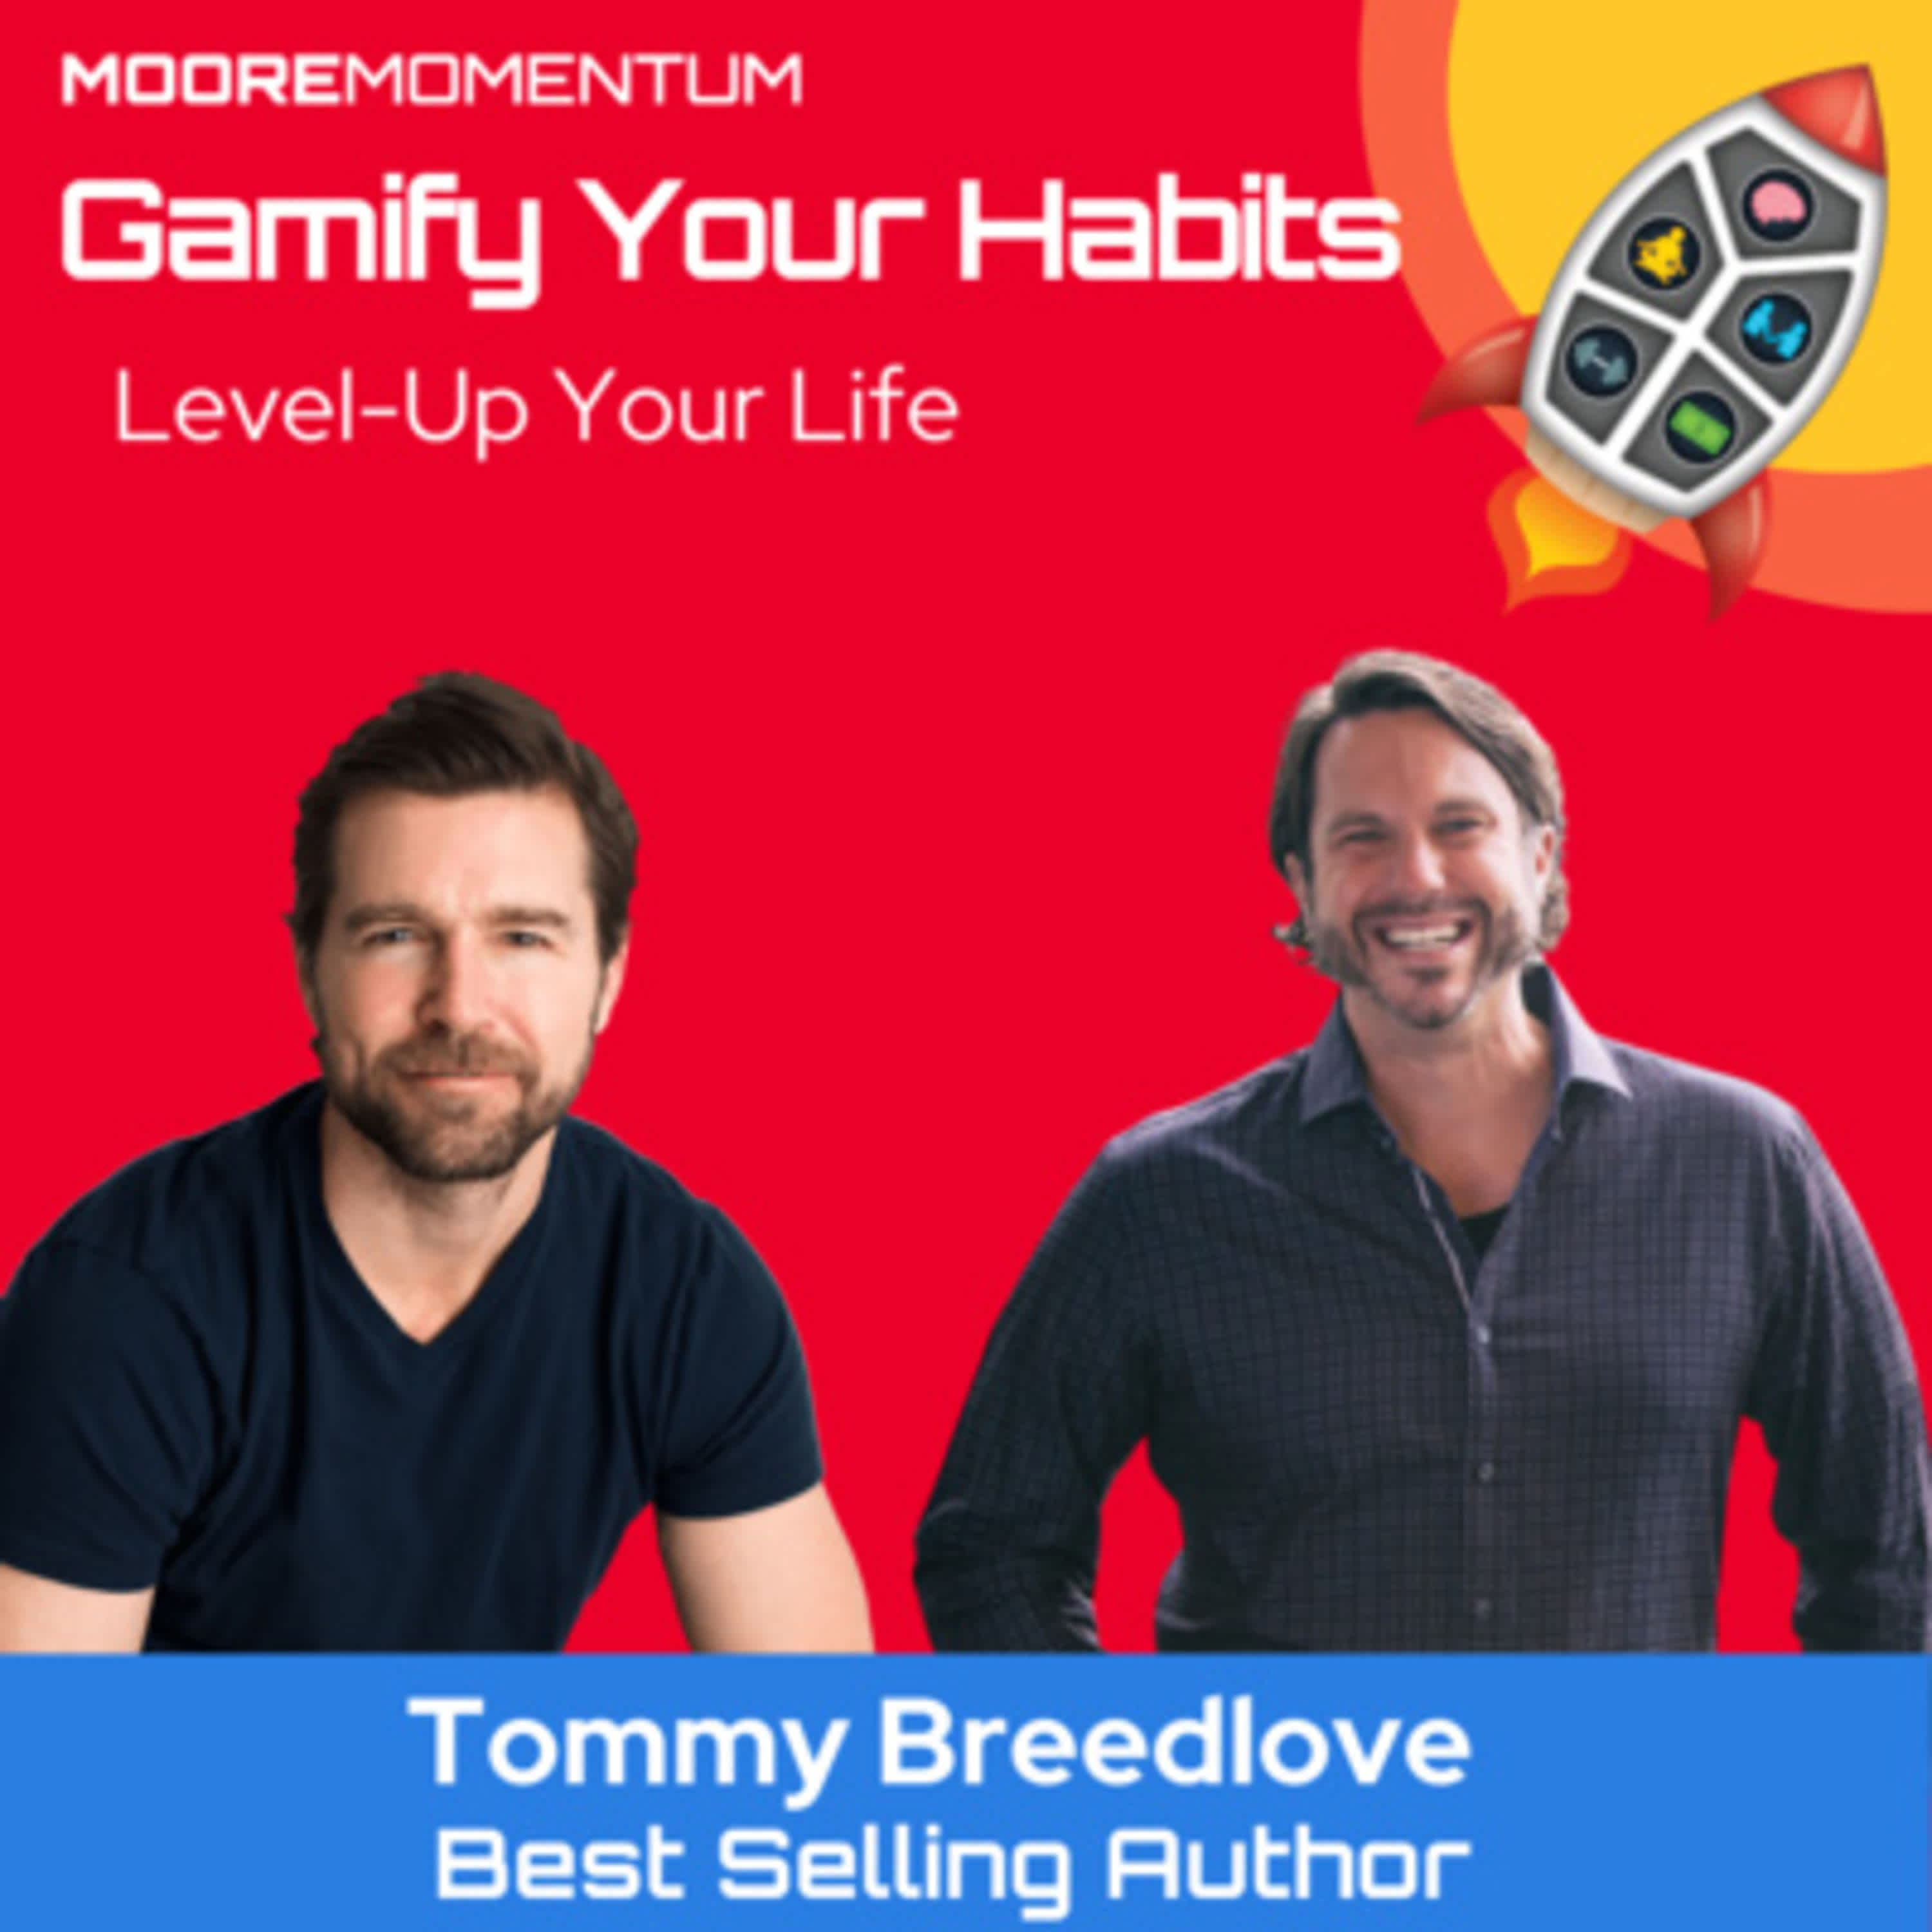 Do you want to be remembered for living a meaningful and impactful life? Here's how you do it!

Will Moore sits down with Tommy Breedlove, the Wall Street Journal best selling author of “Legendary”.